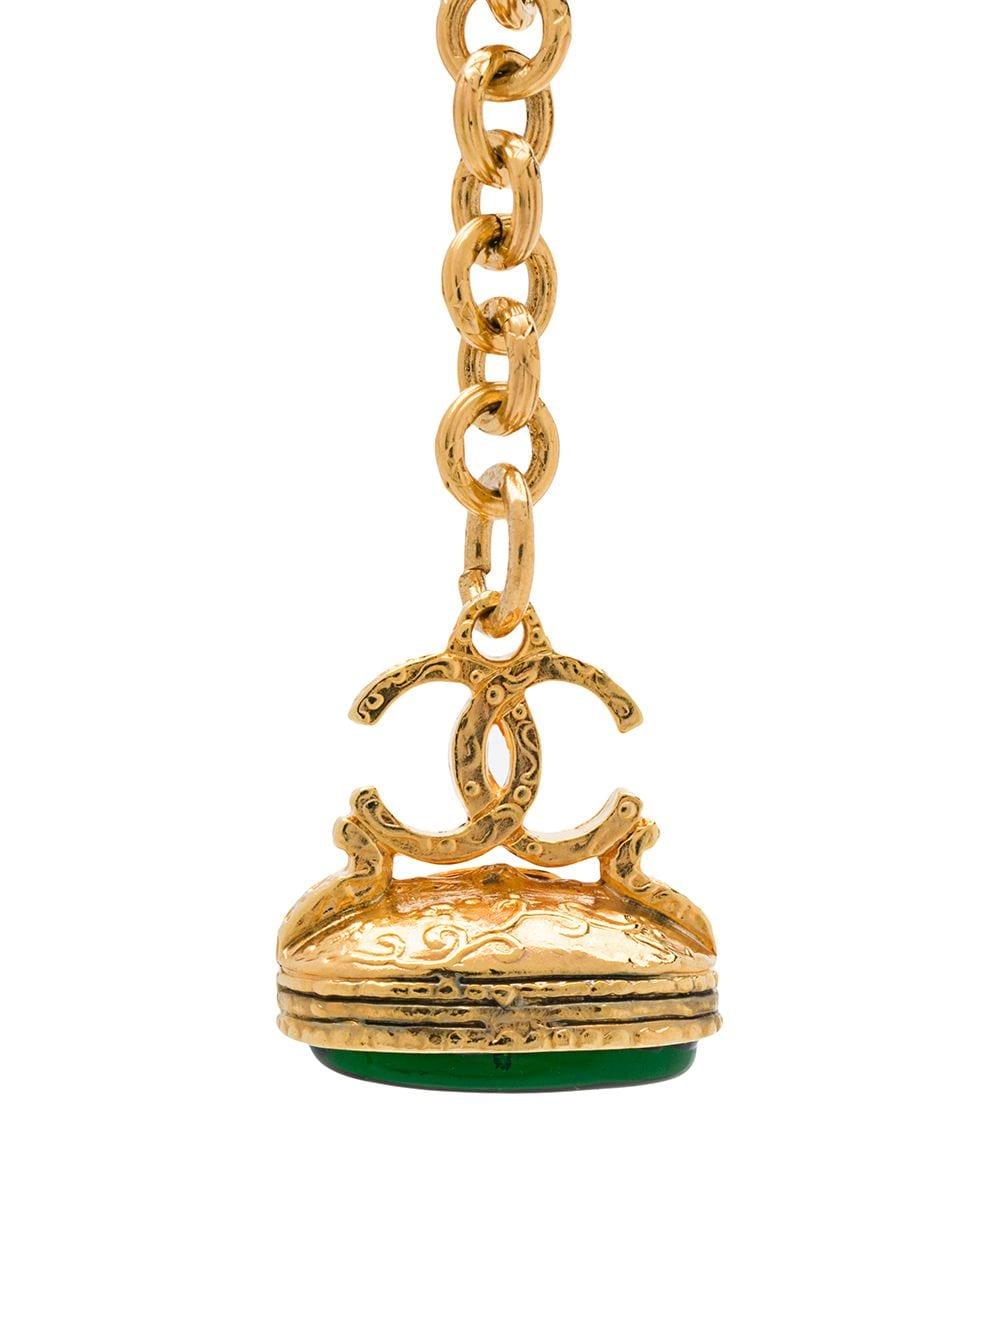 Crafted in France from antique gold plated metal, this elegant keychain boasts a cable-link chain, an engraved finish and a green gripoix glass stone embellishment which hangs decoratively underneath the signature interlocking CC logo charm from a